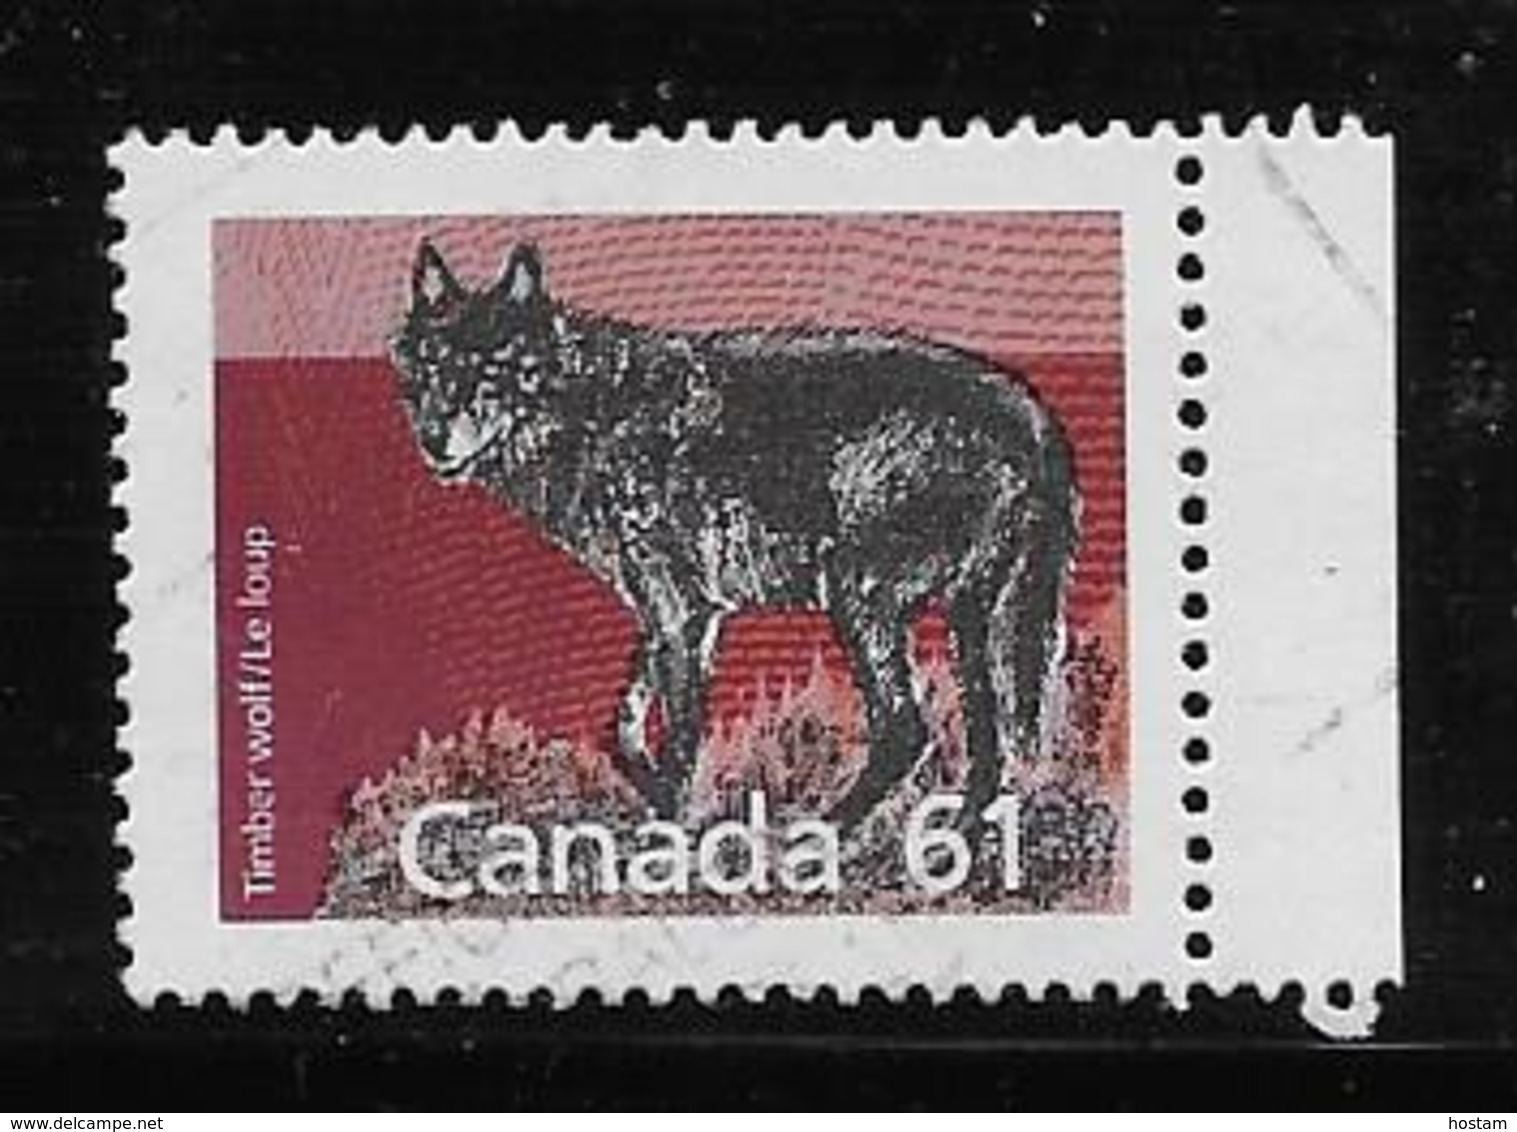 ANADA 1989, USED # 1175,  MAMALS DEFINITIVES: TIMBER WOLF,  PERF  14.4 - Used Stamps